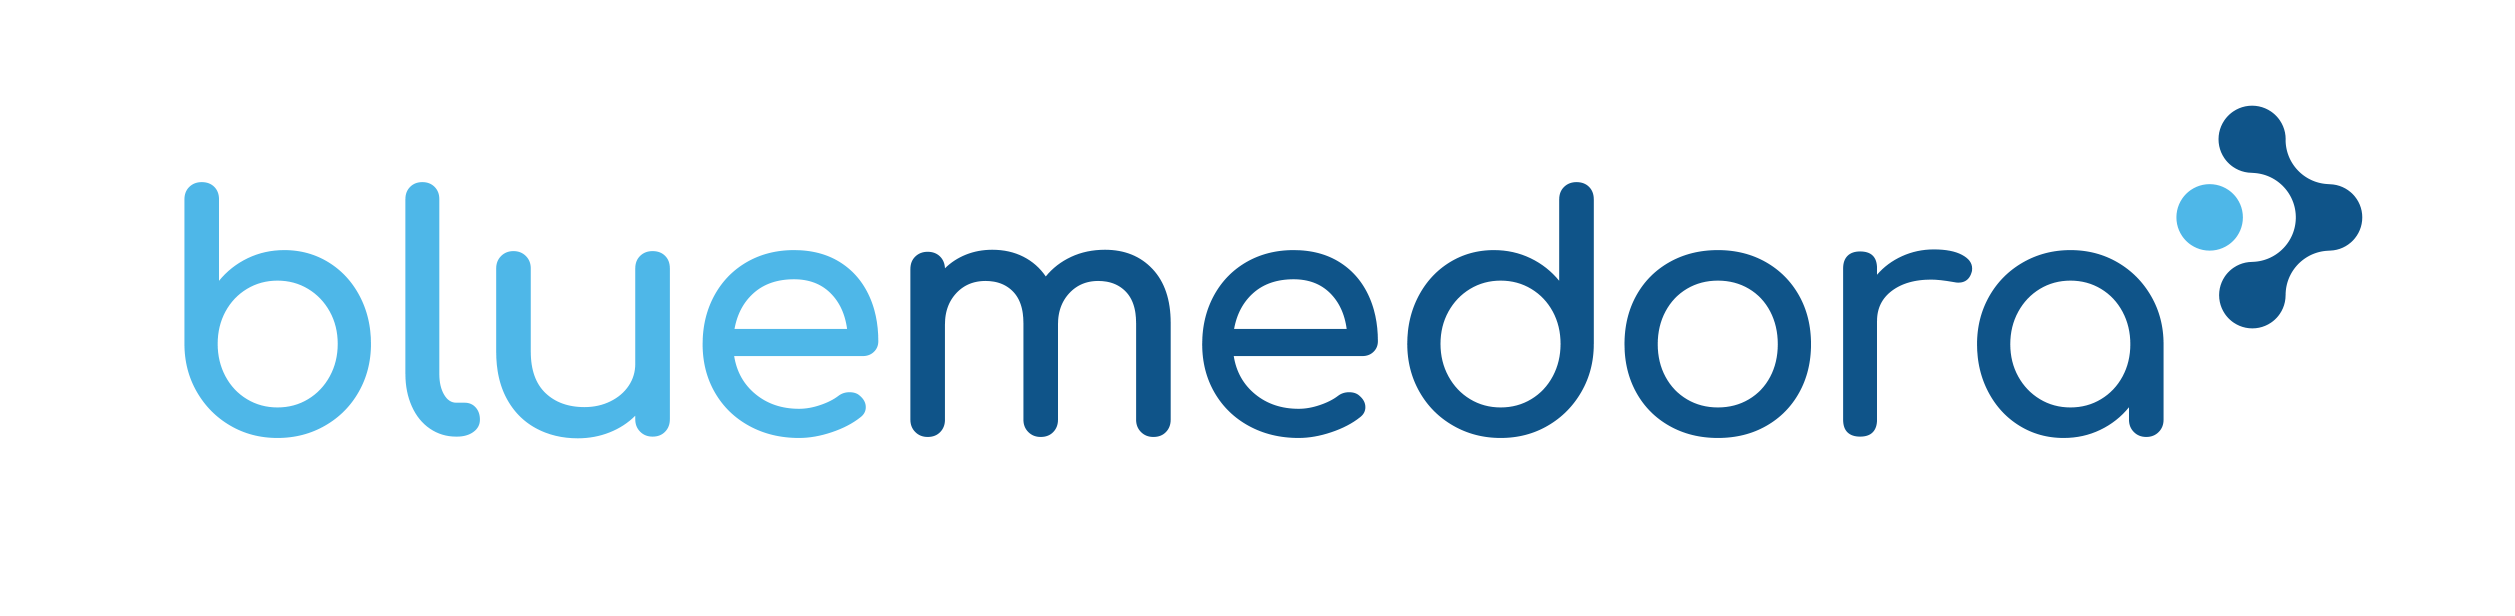 Edison Partners Leads $10 Million Growth Equity Investment in Blue Medora